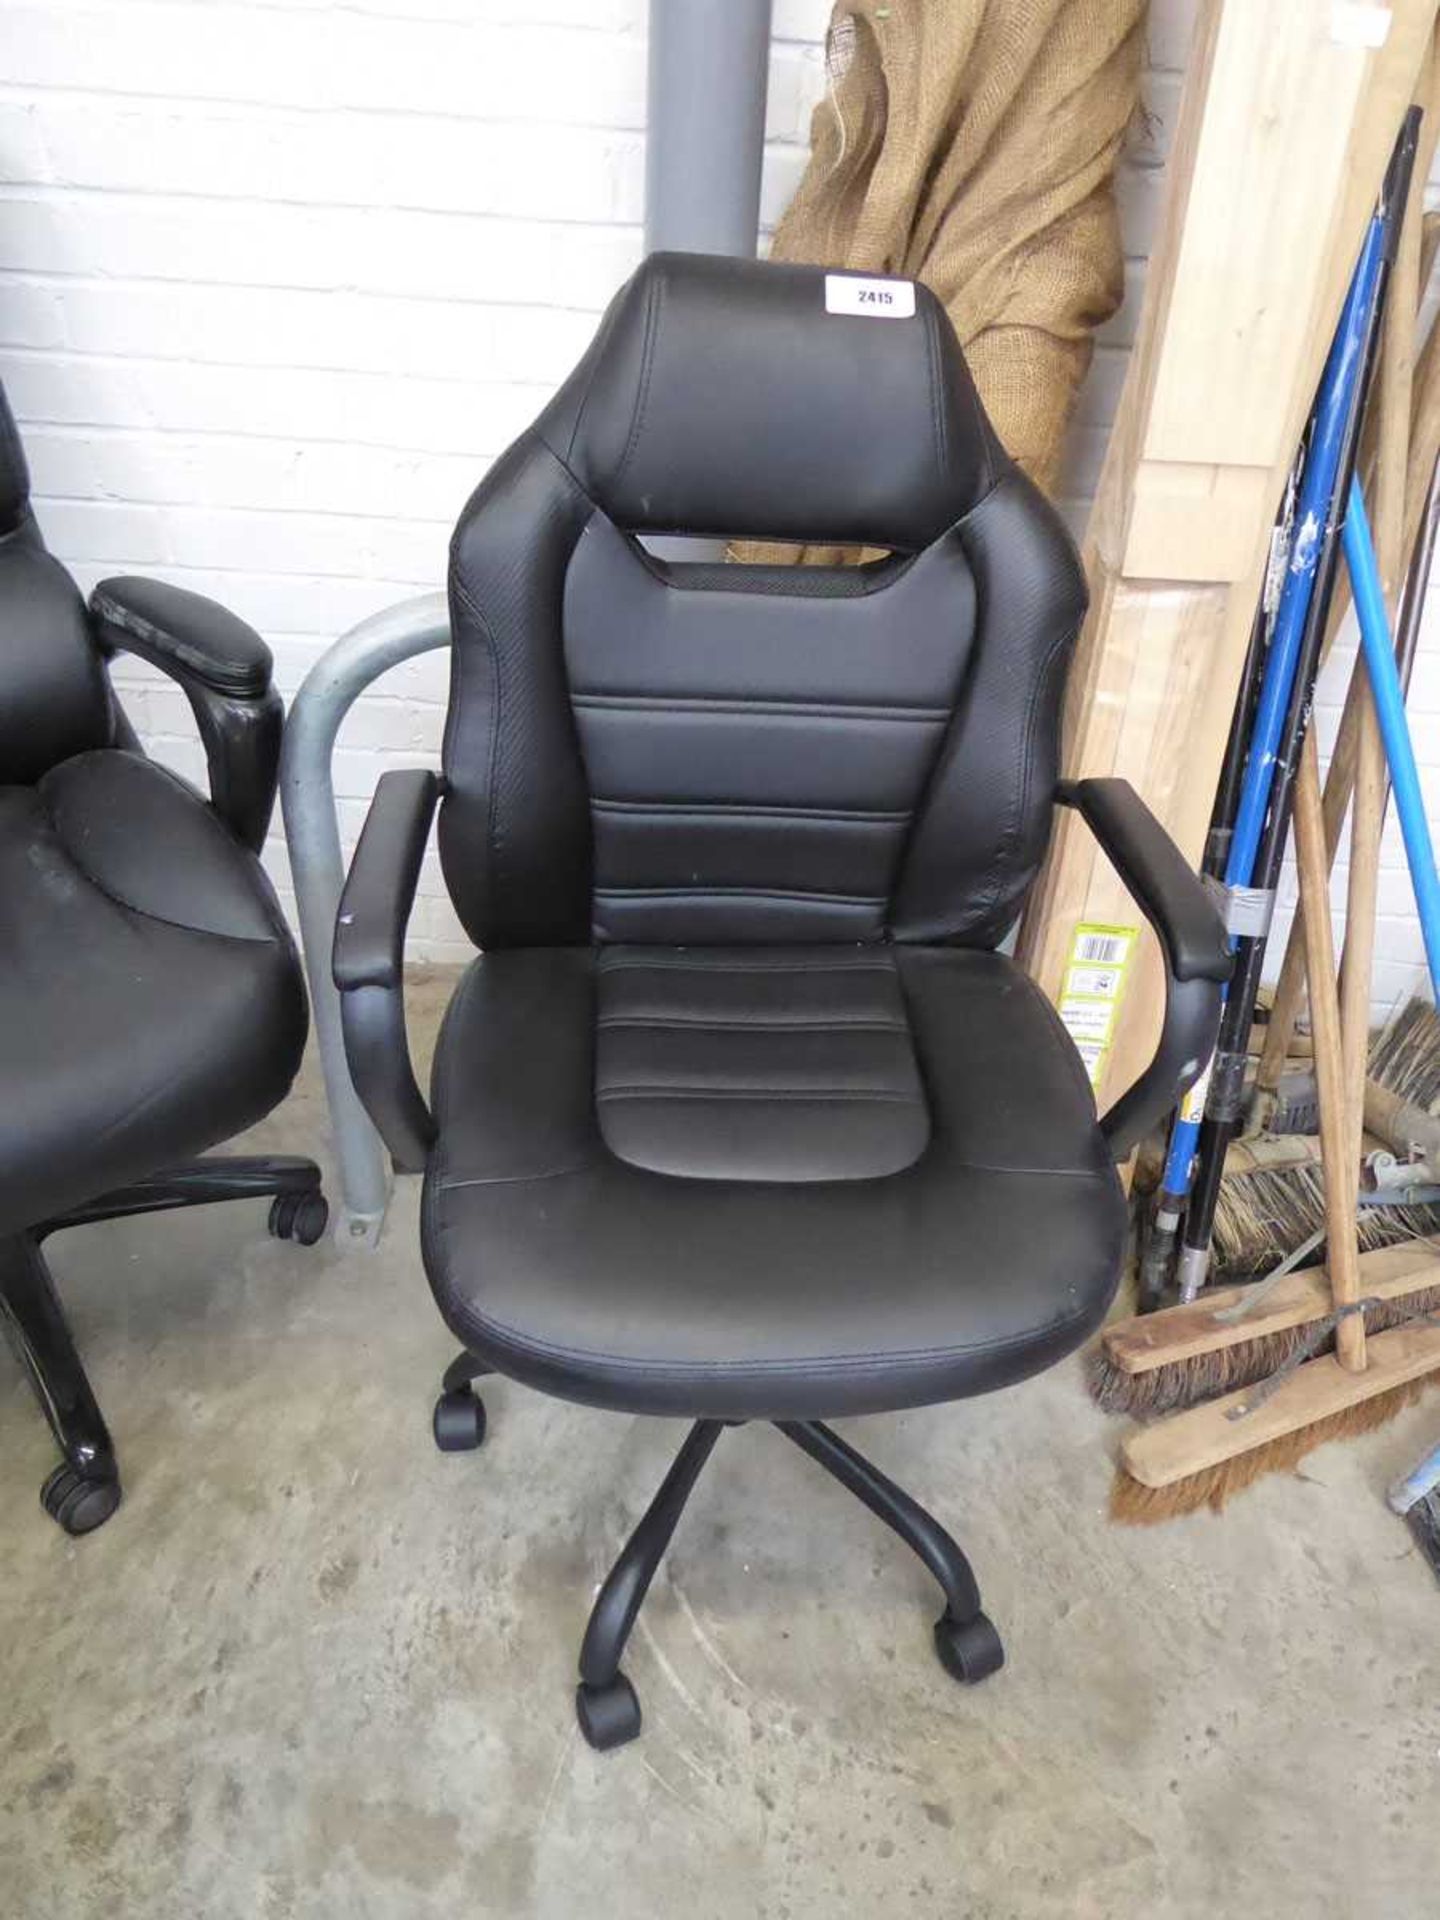 +VAT Twin armed gaming chair with 5 star base support, unboxed